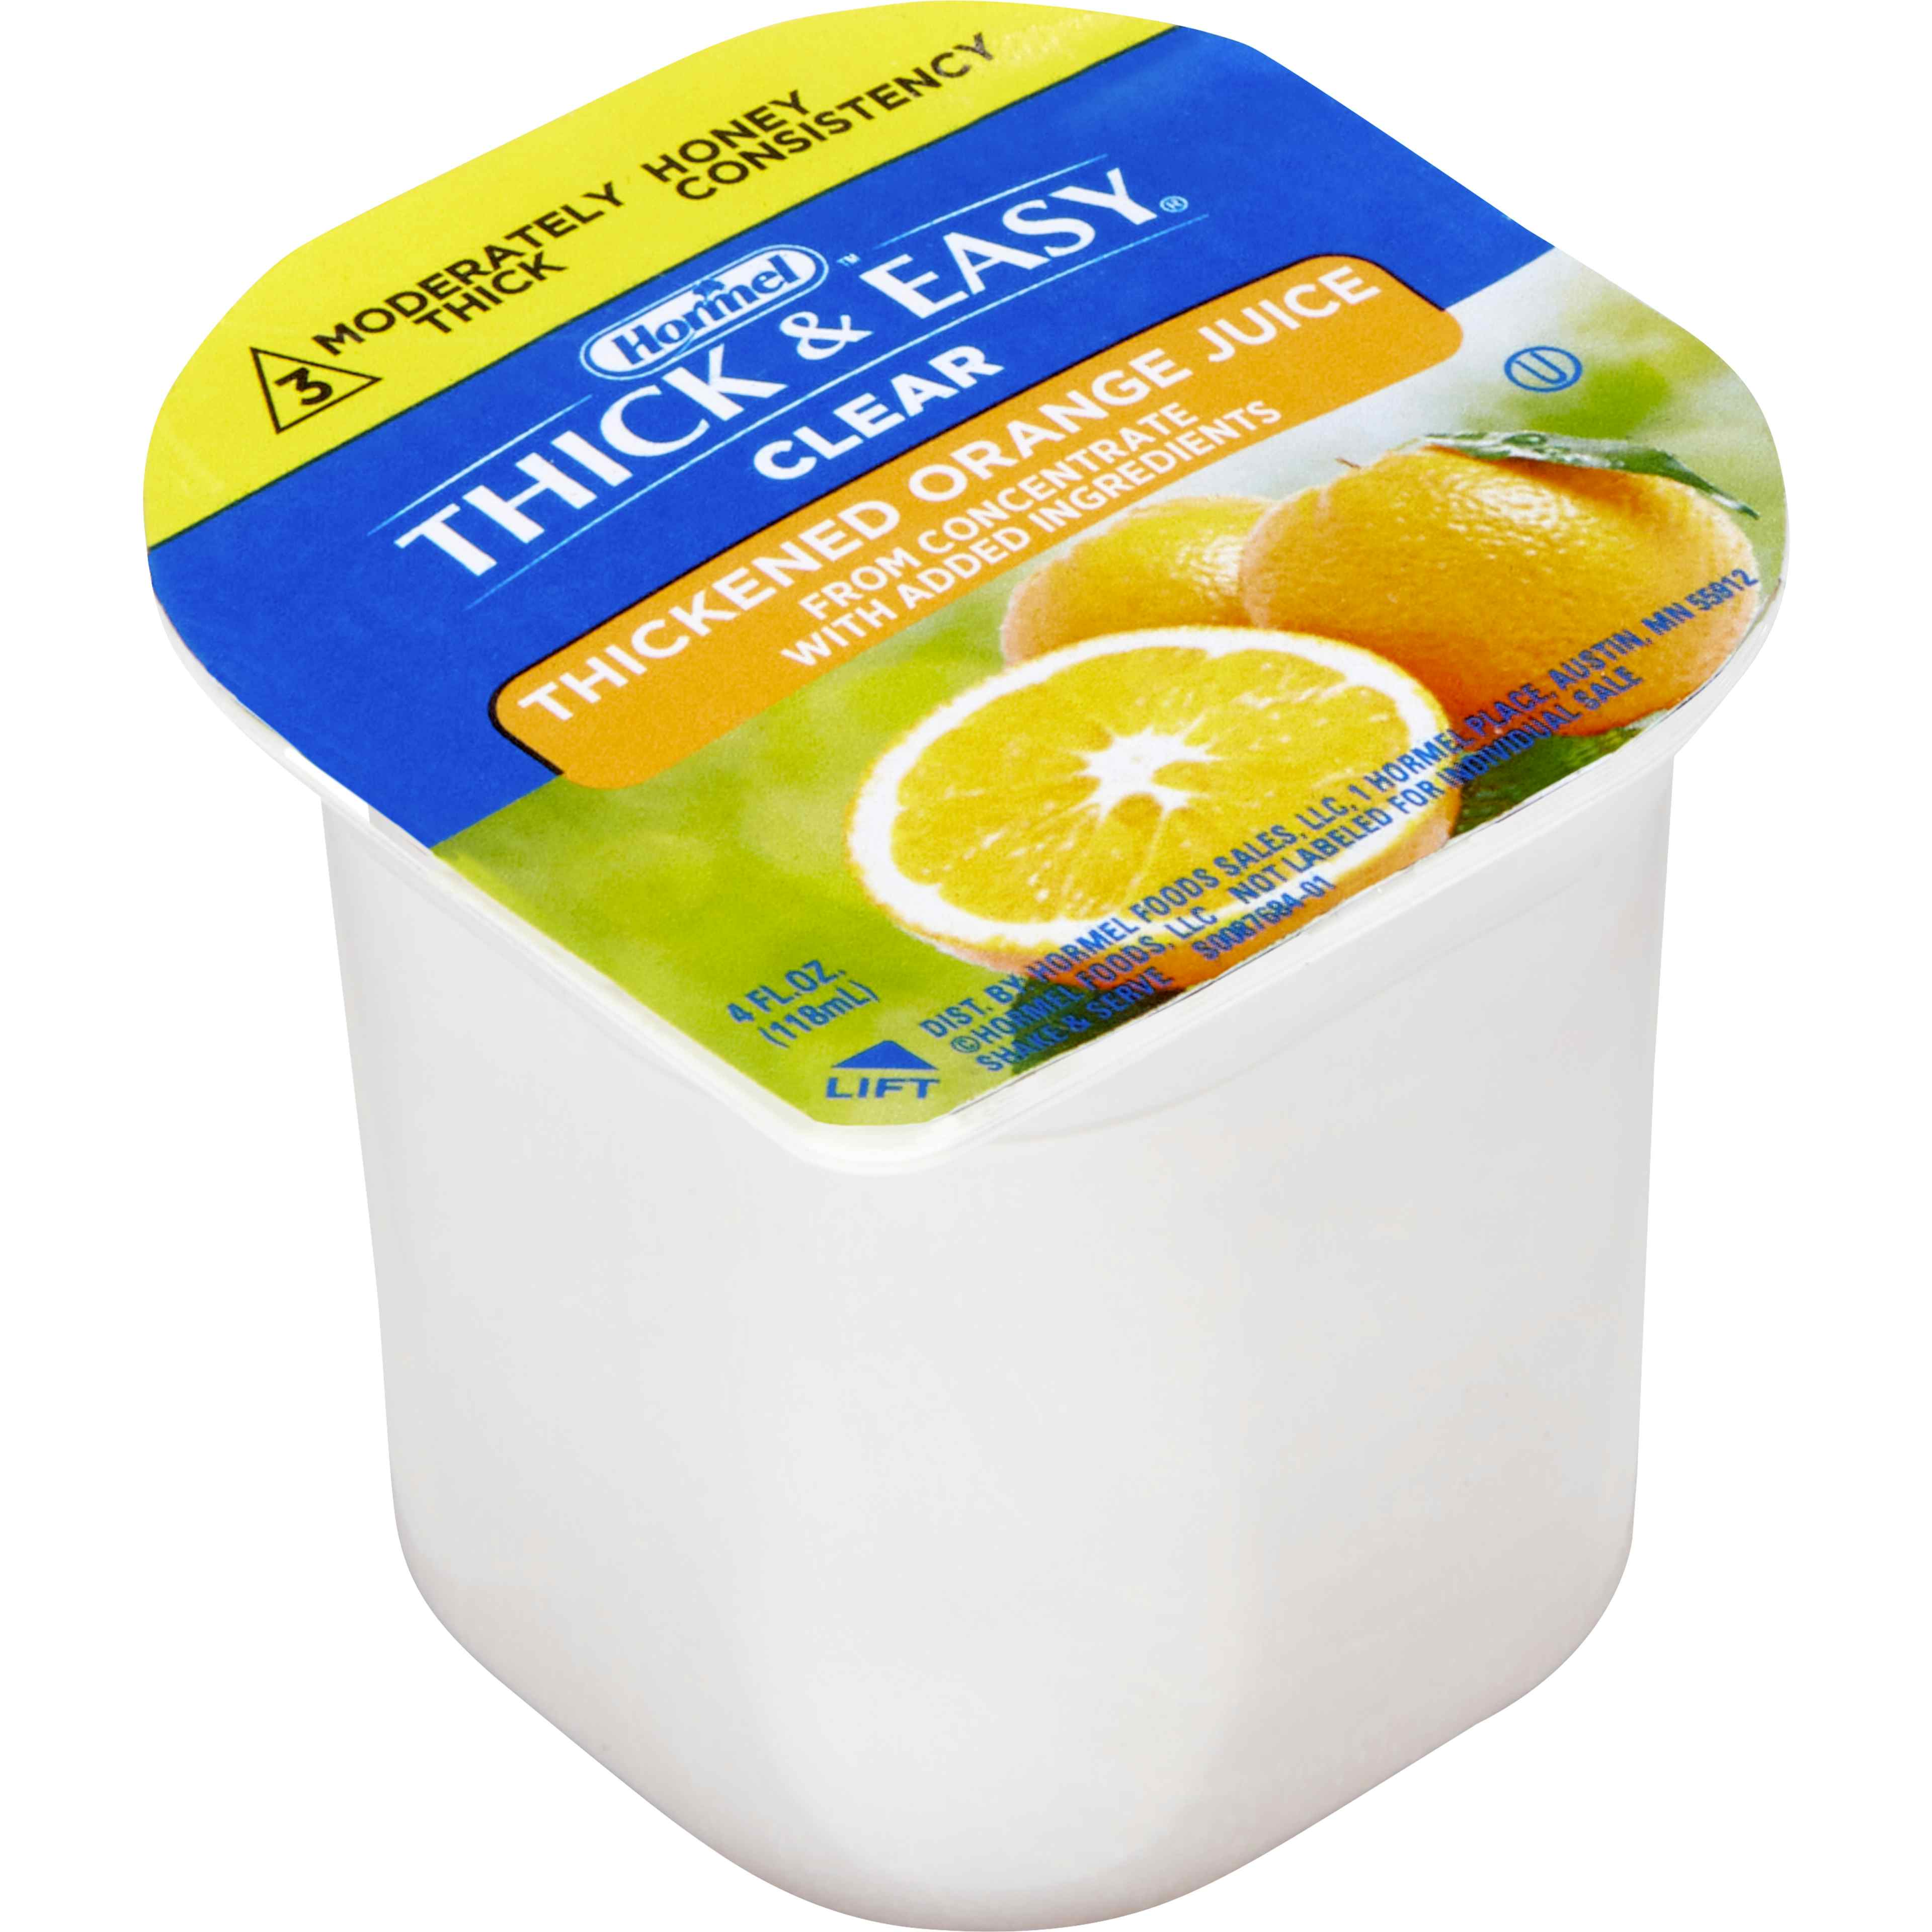 Hormel Thick & Easy Clear Thickened Beverage, Honey Consistency, Moderately Thick, Orange Juice